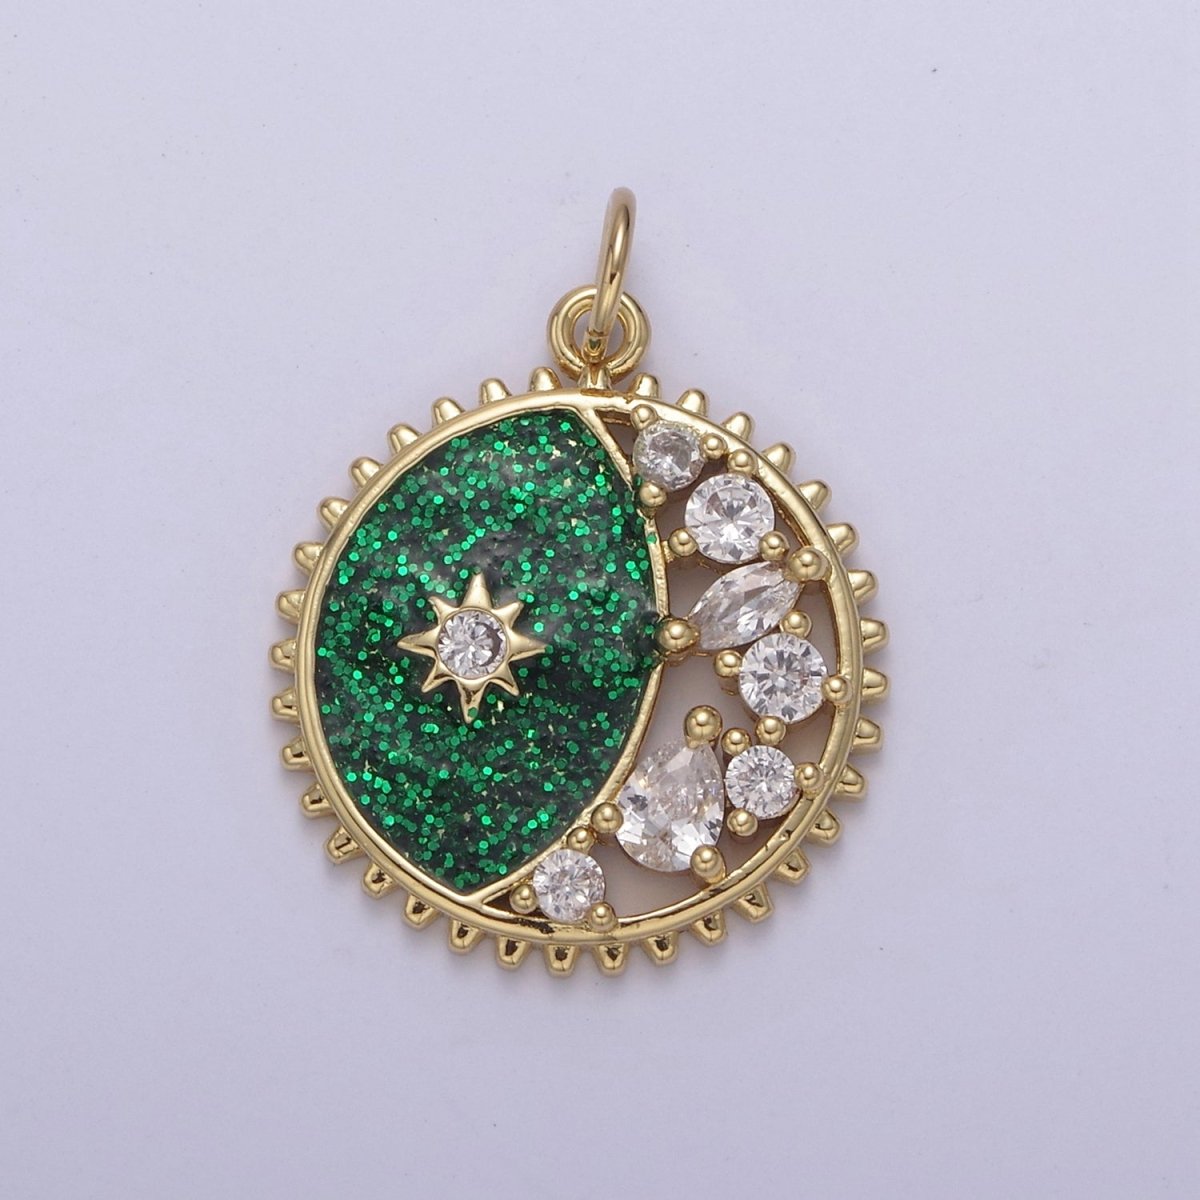 Starburst Star Glitter Sparkle Coin Charm, 17mm coin Gold Filled CZ Coin, Celestial CZ Drop Pendant N-726 - N-728 - DLUXCA